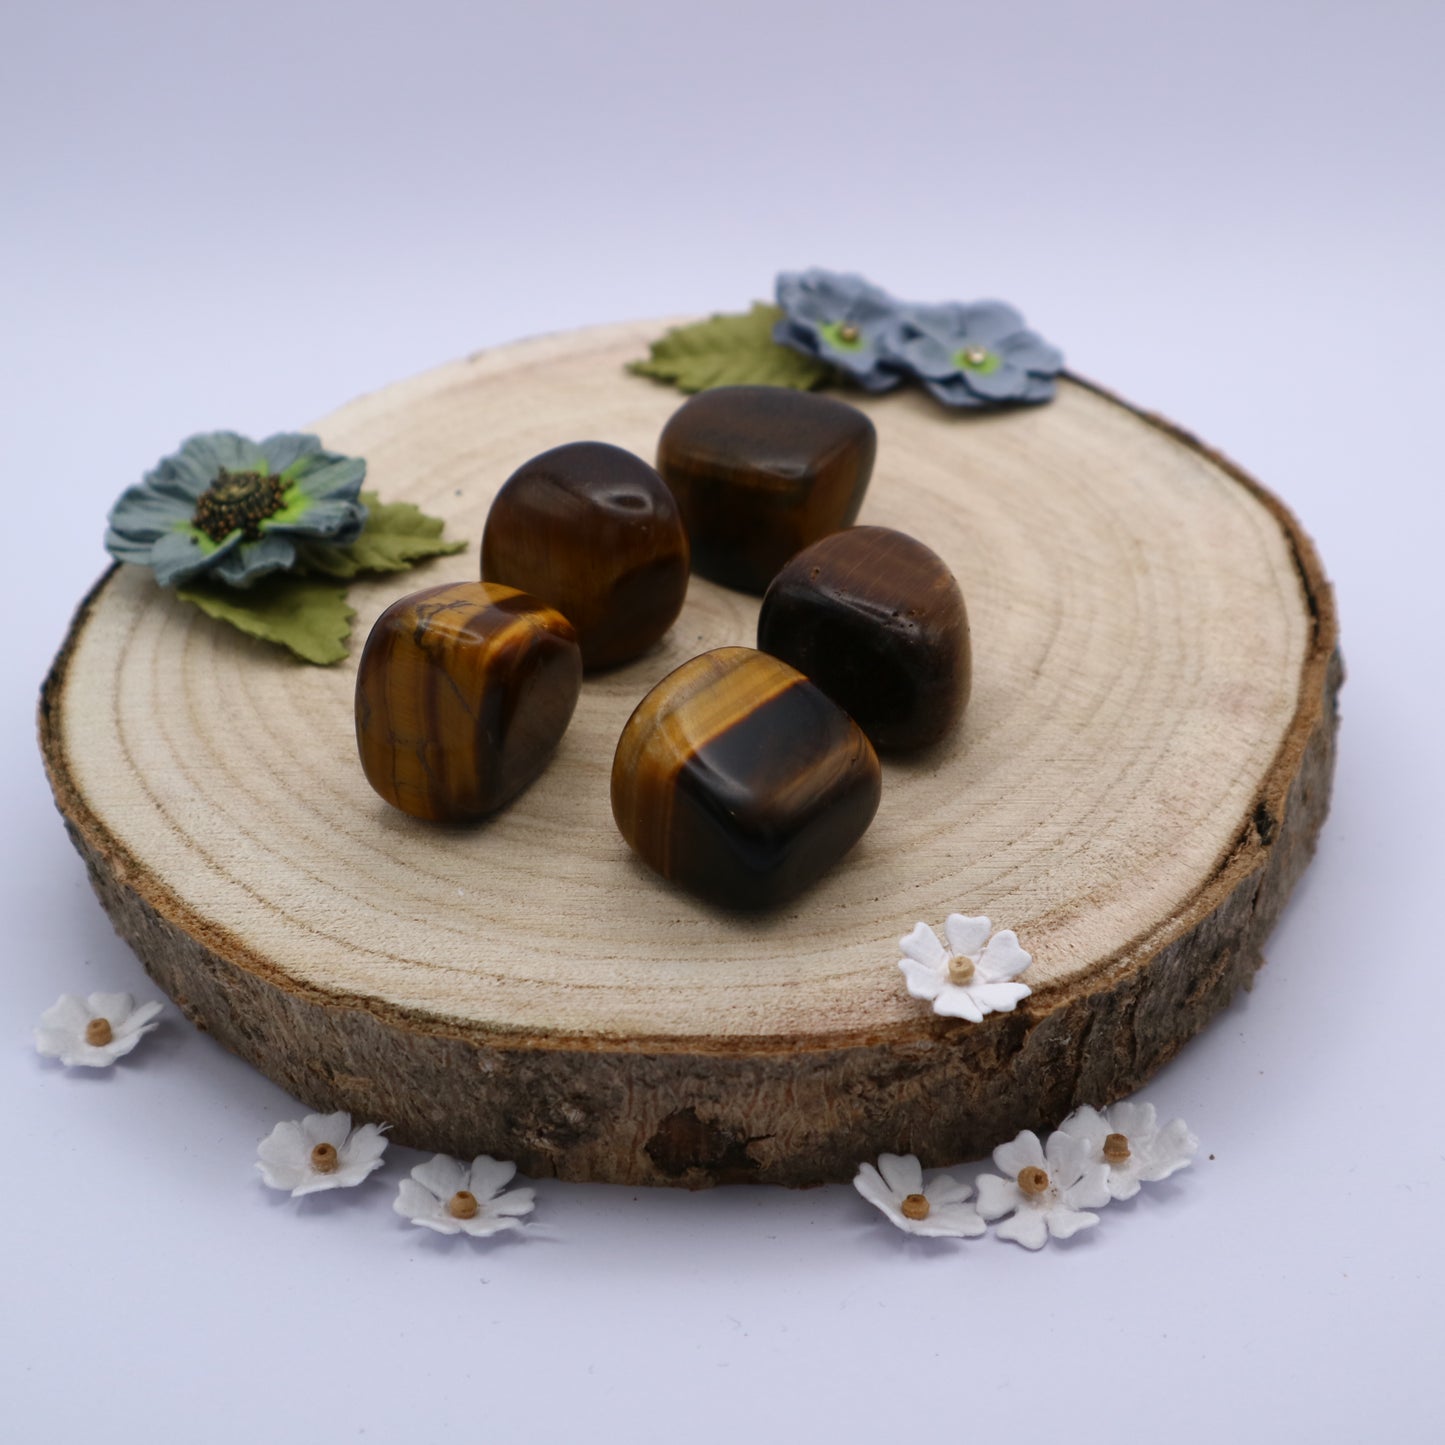 Five pieces of Tiger Eye crystals displayed on a piece of wood surrounded by flowers